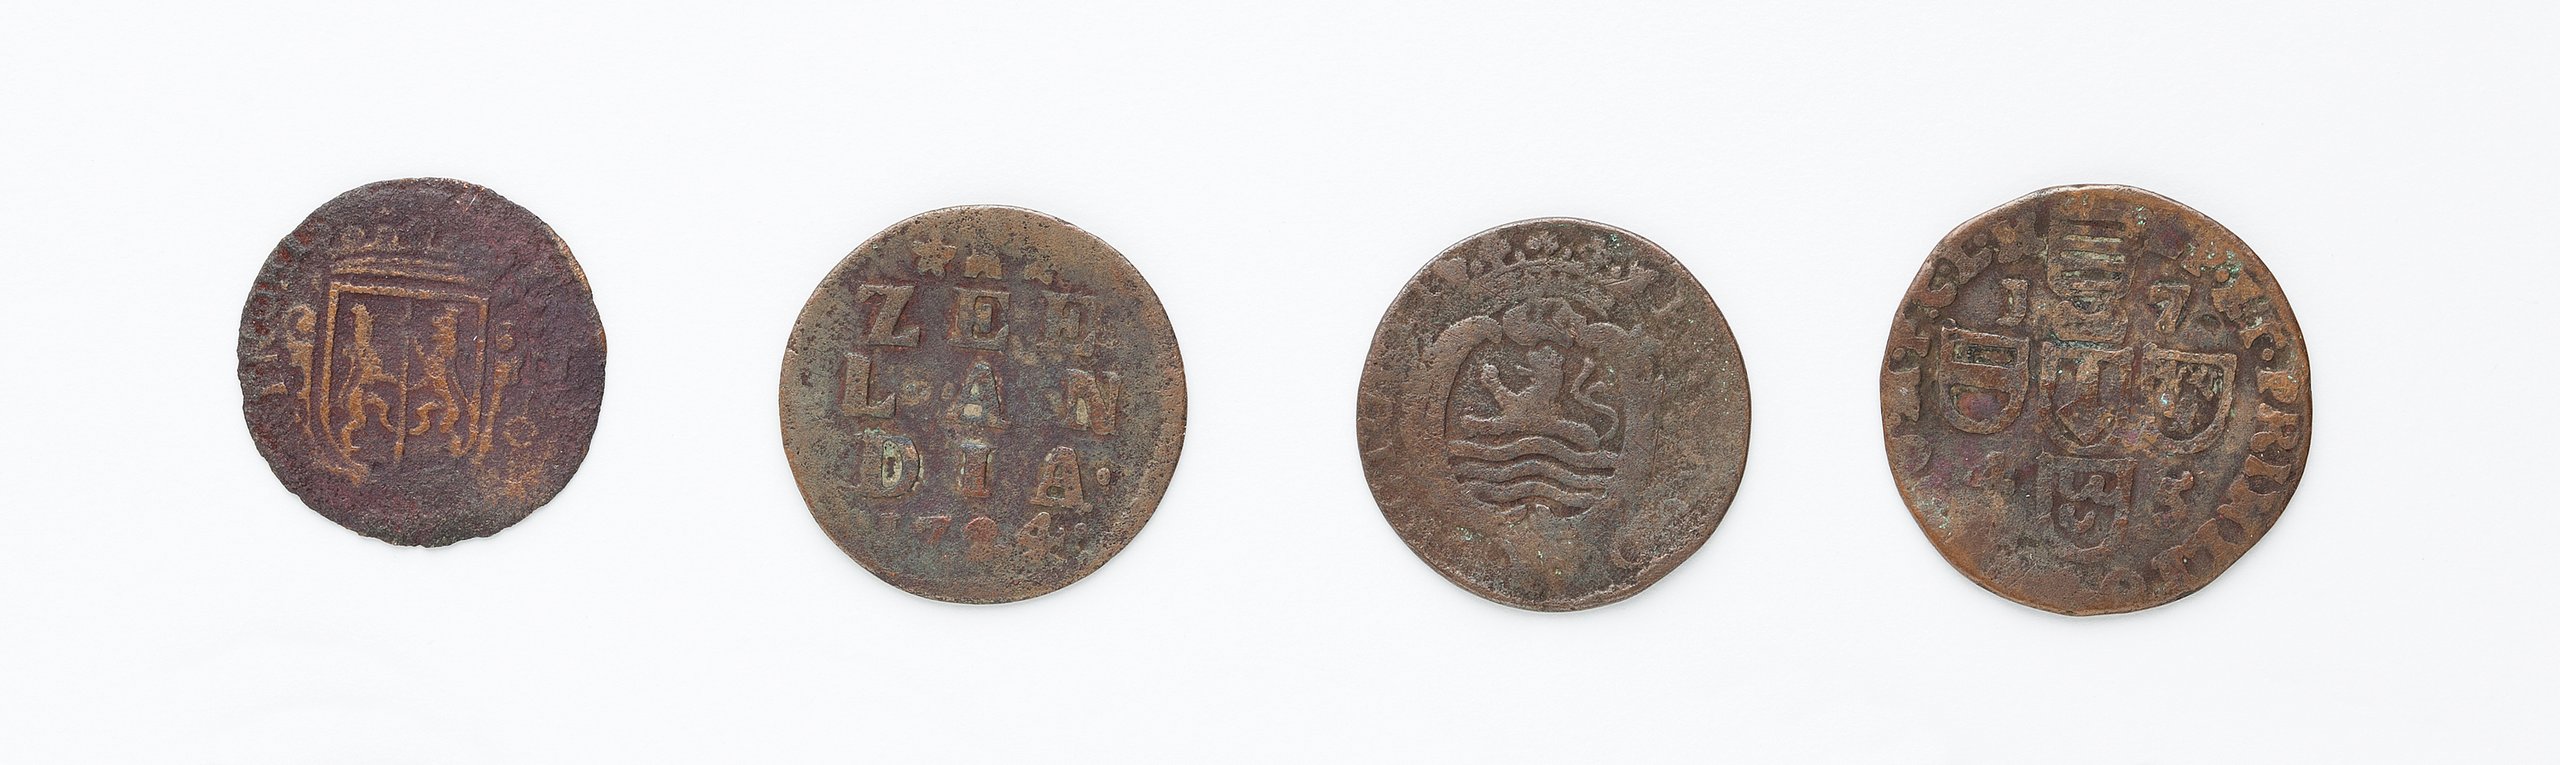 Collection of coins, photograph and documentation